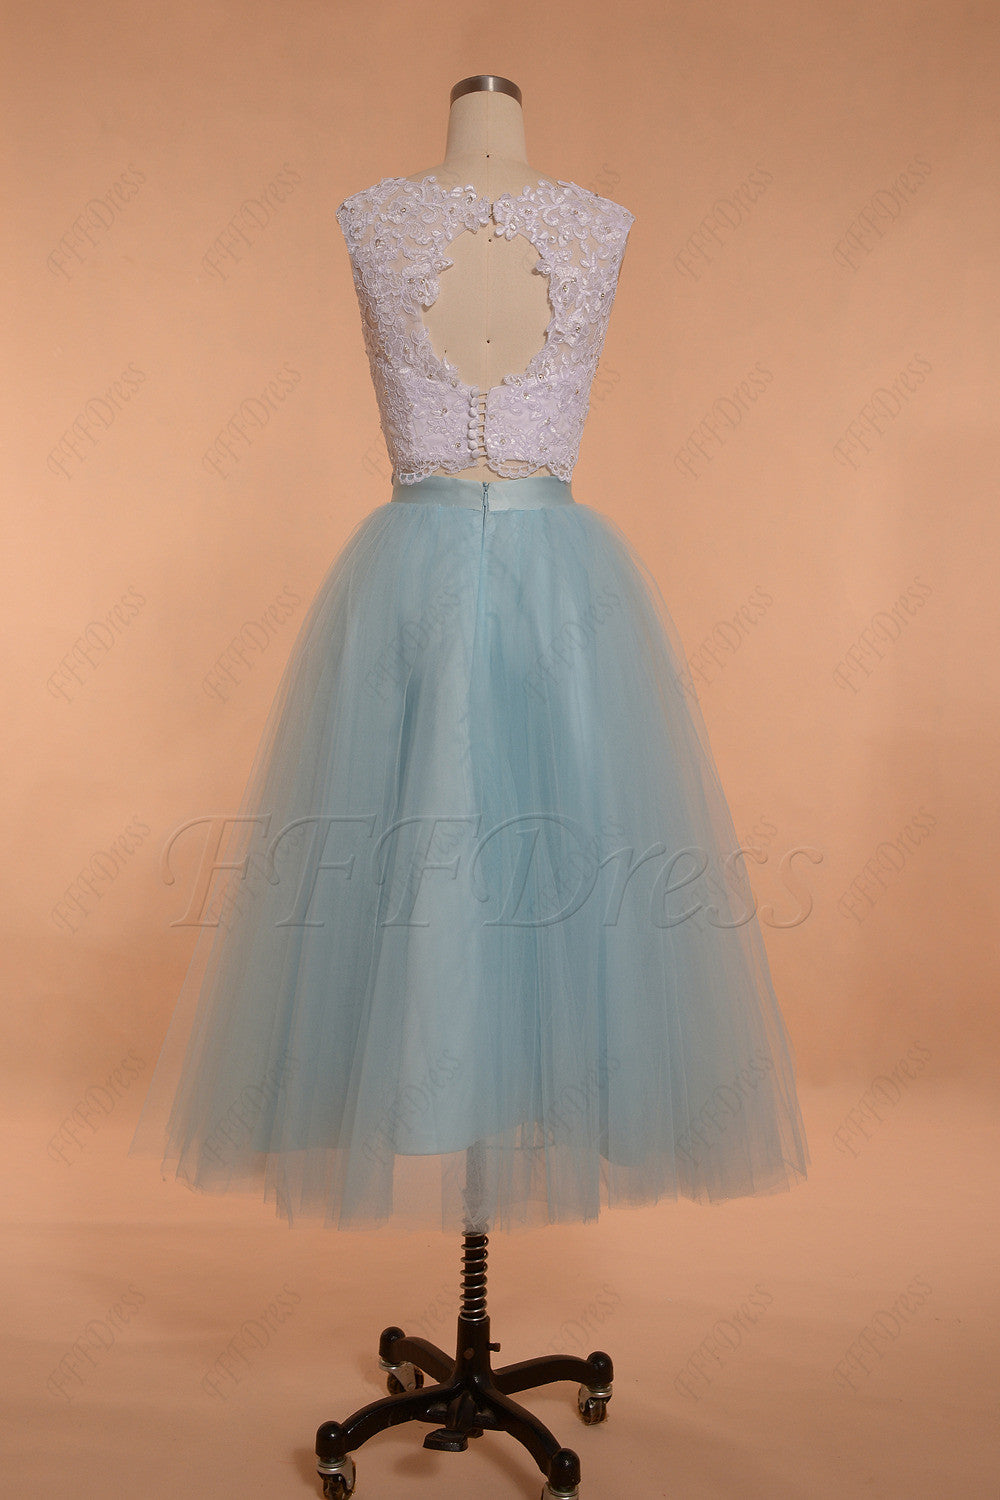 Light blue two piece homecoming dresses